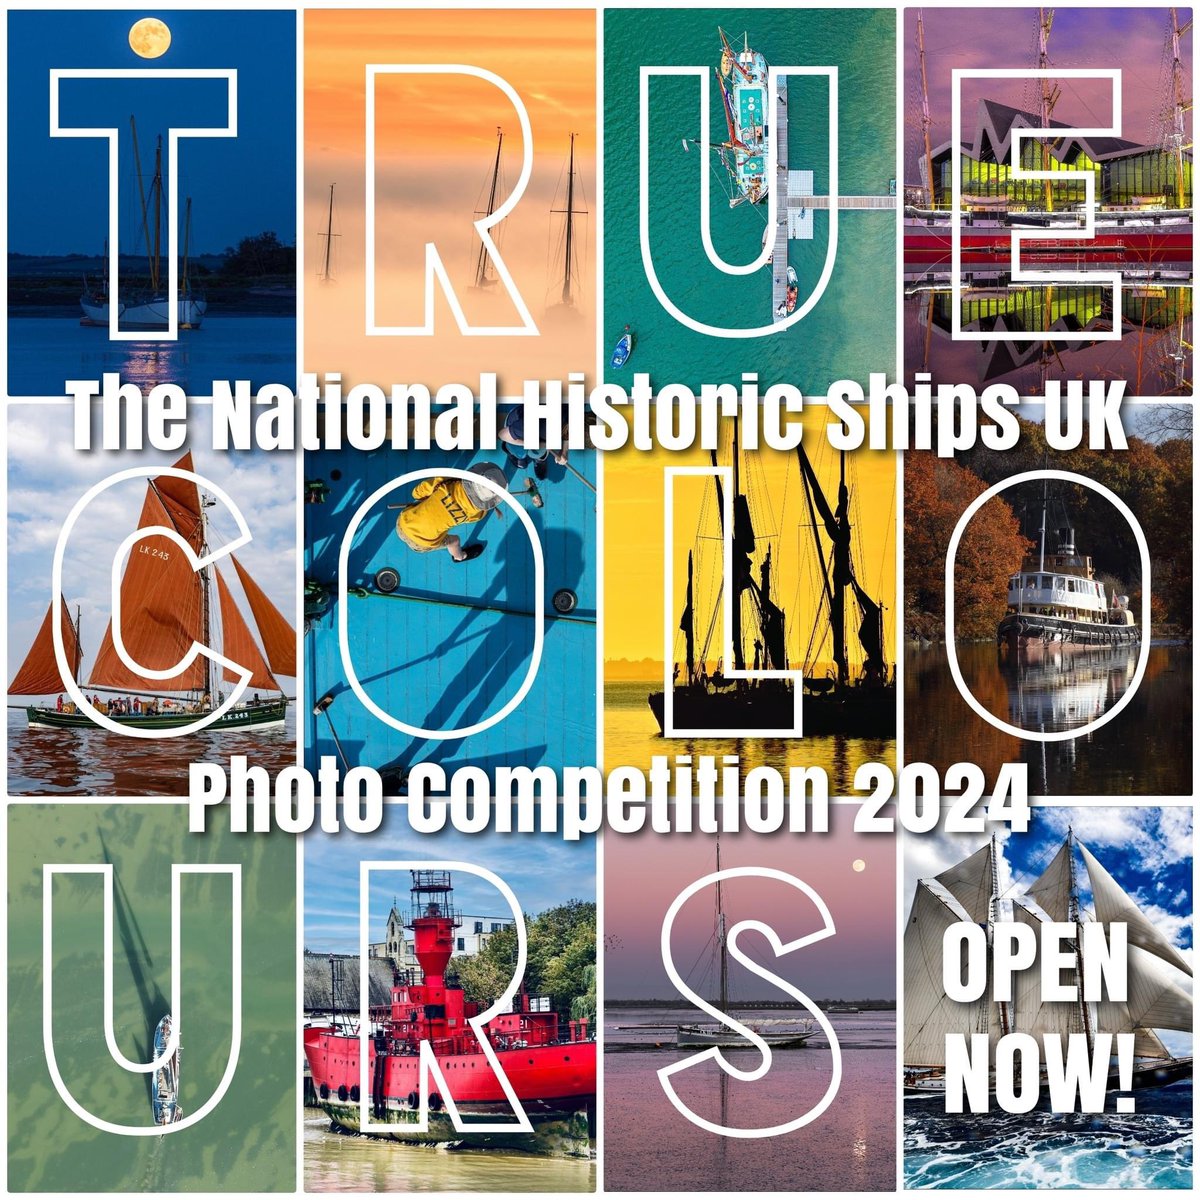 Calling all photographers 📢 The 2024 @NatHistShips Photography Competition is now open! This year’s theme is 'True Colours' and there are some fantastic prizes to be won Read more about the competition and enter below👇 nationalhistoricships.org.uk/photocomp #photography #portsmouth #navy